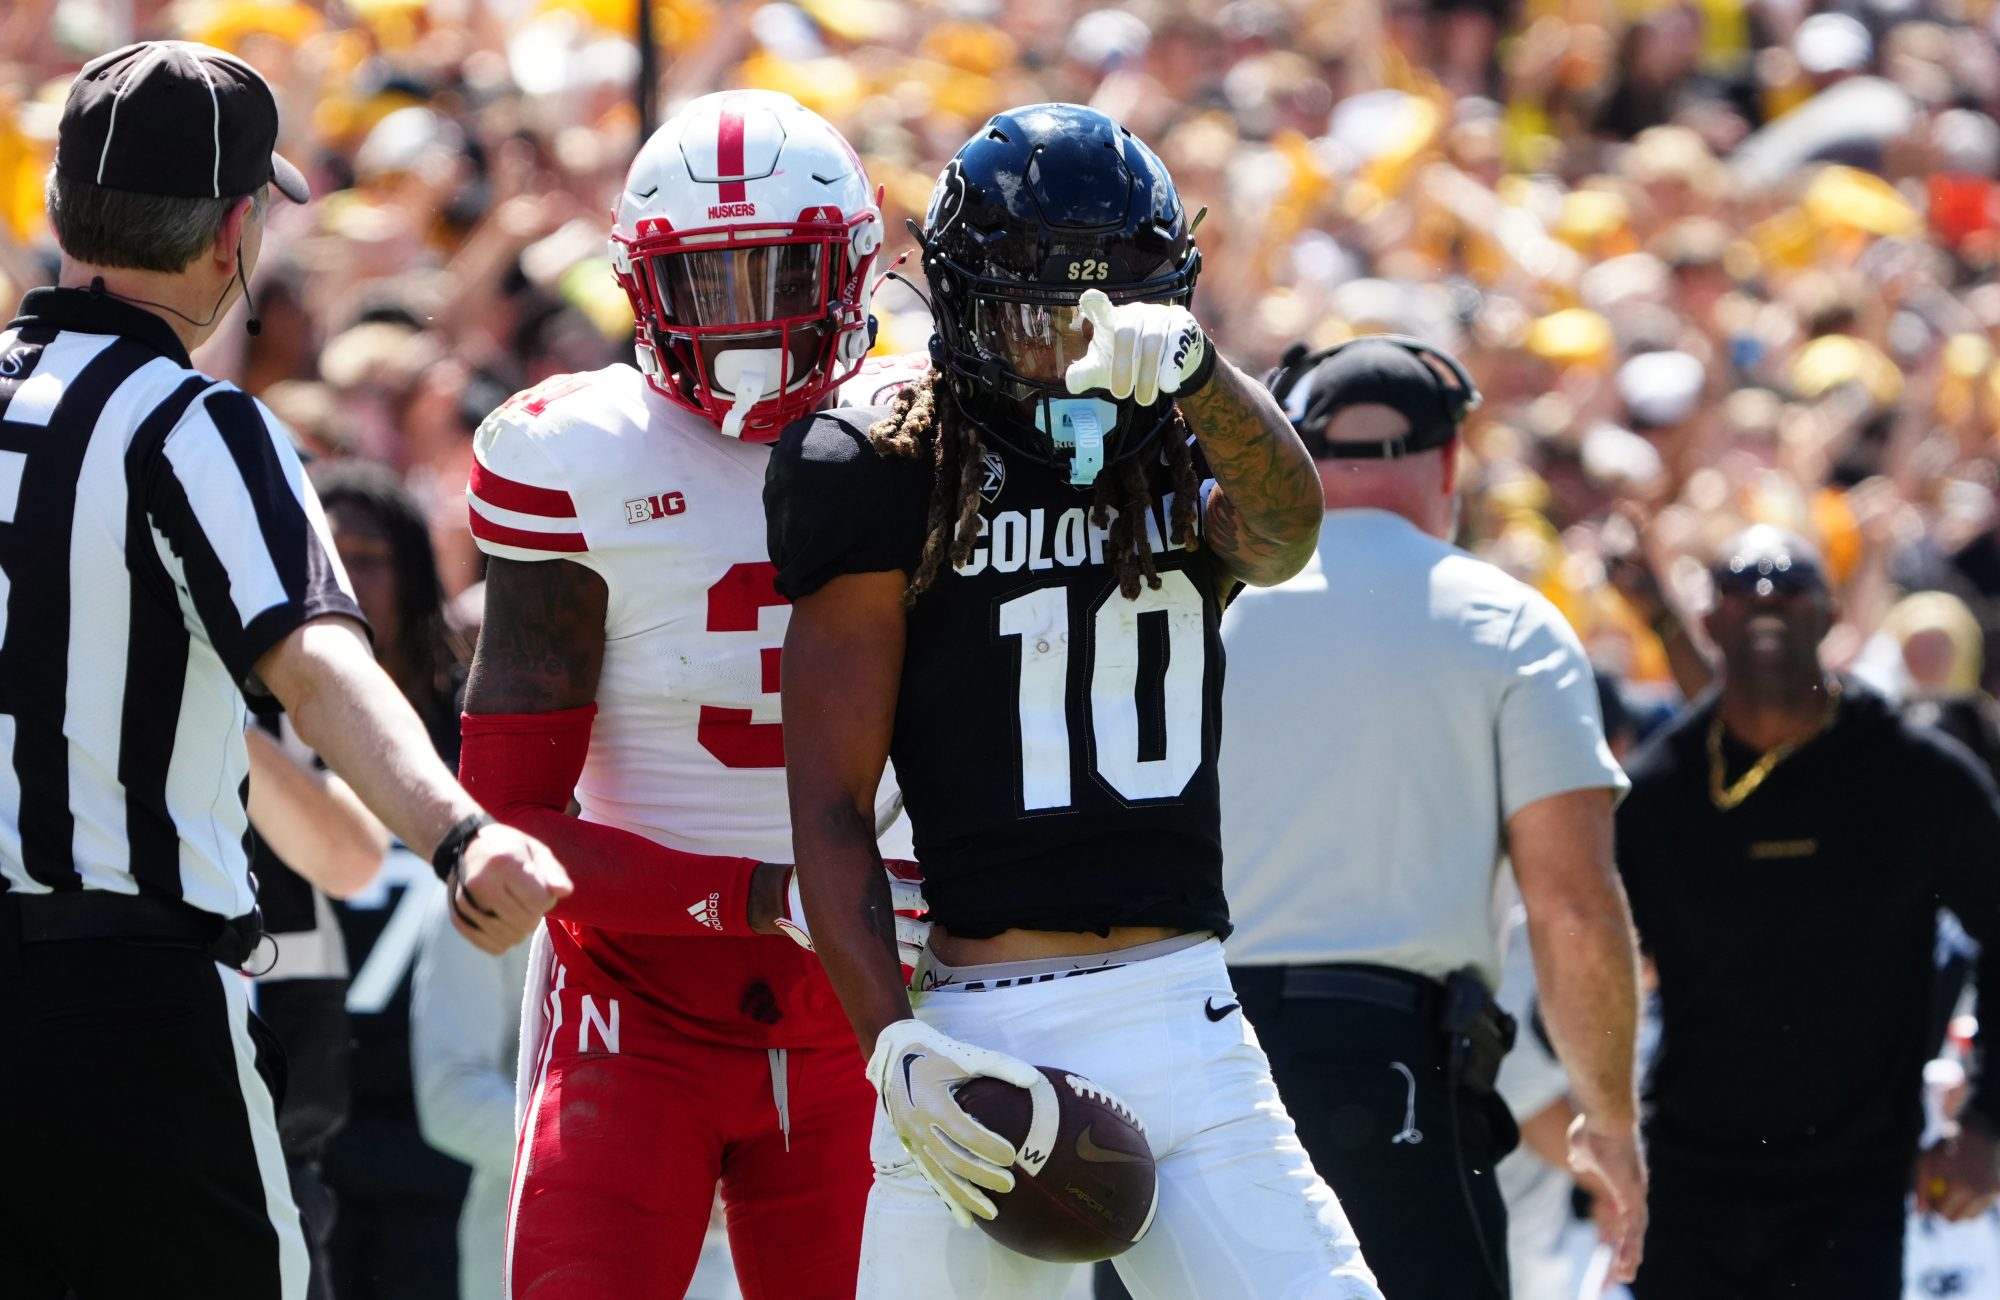 Colorado Buffaloes wide receiver Xavier Weaver (10) reacts to his first down reception catch next to Nebraska Cornhuskers linebacker Nick Henrich (3) during the third quarter at Folsom Field.